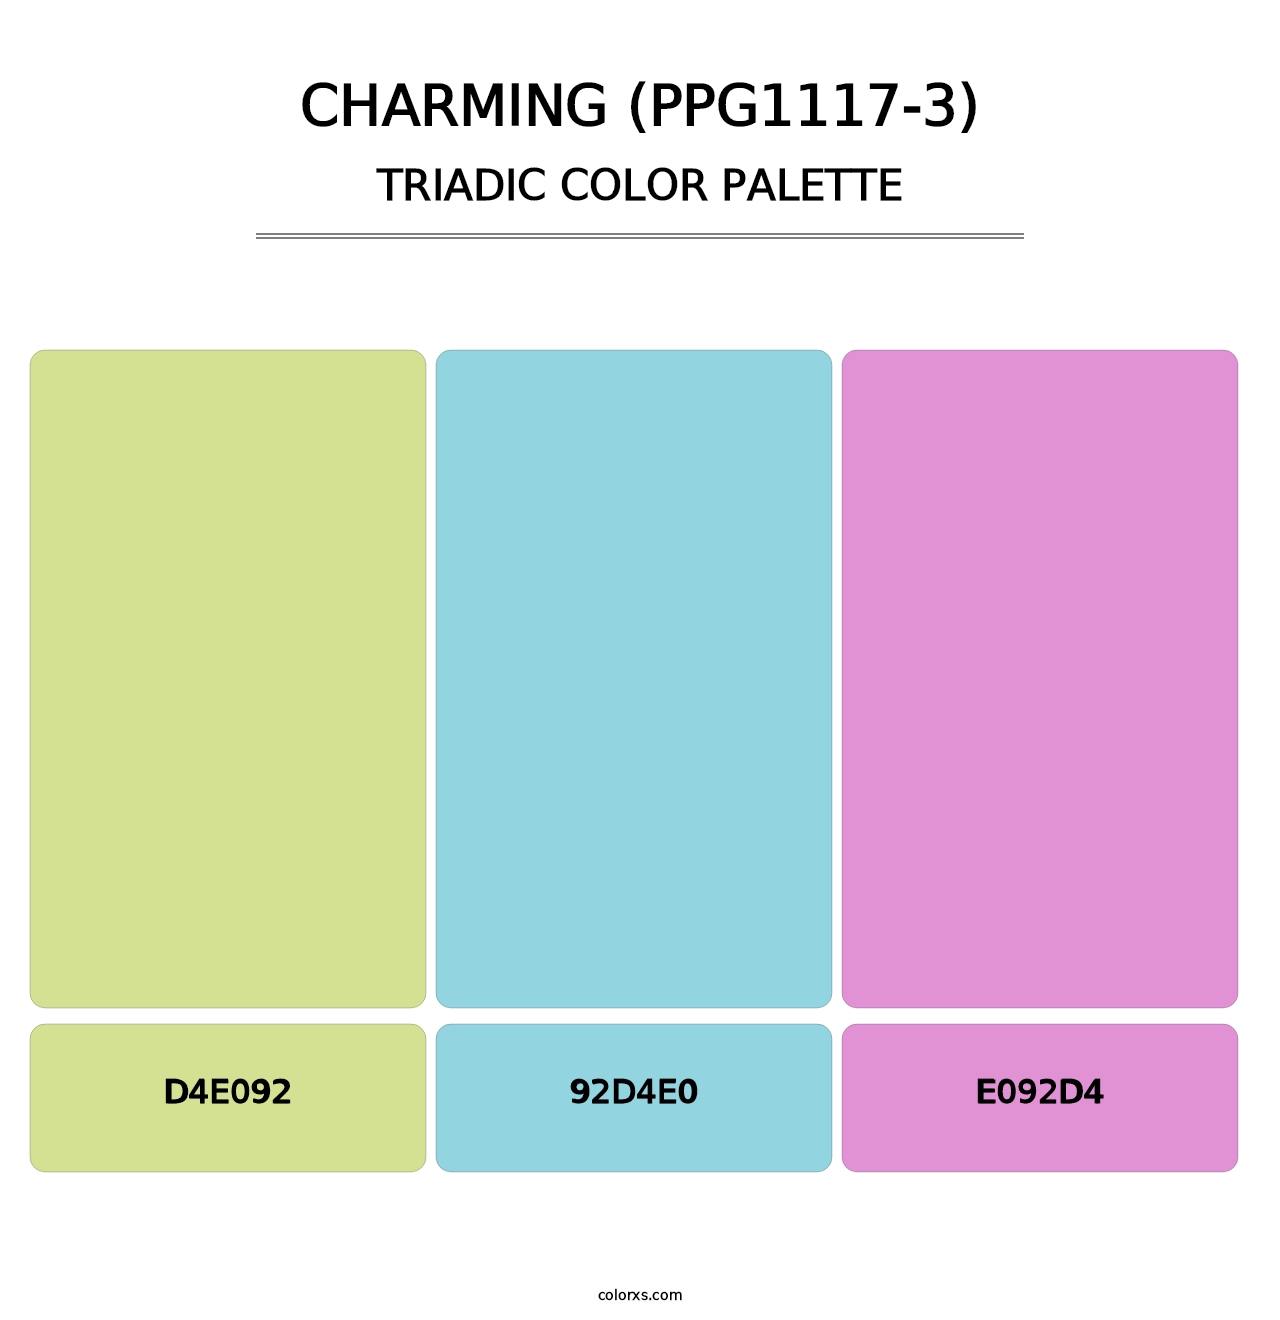 Charming (PPG1117-3) - Triadic Color Palette